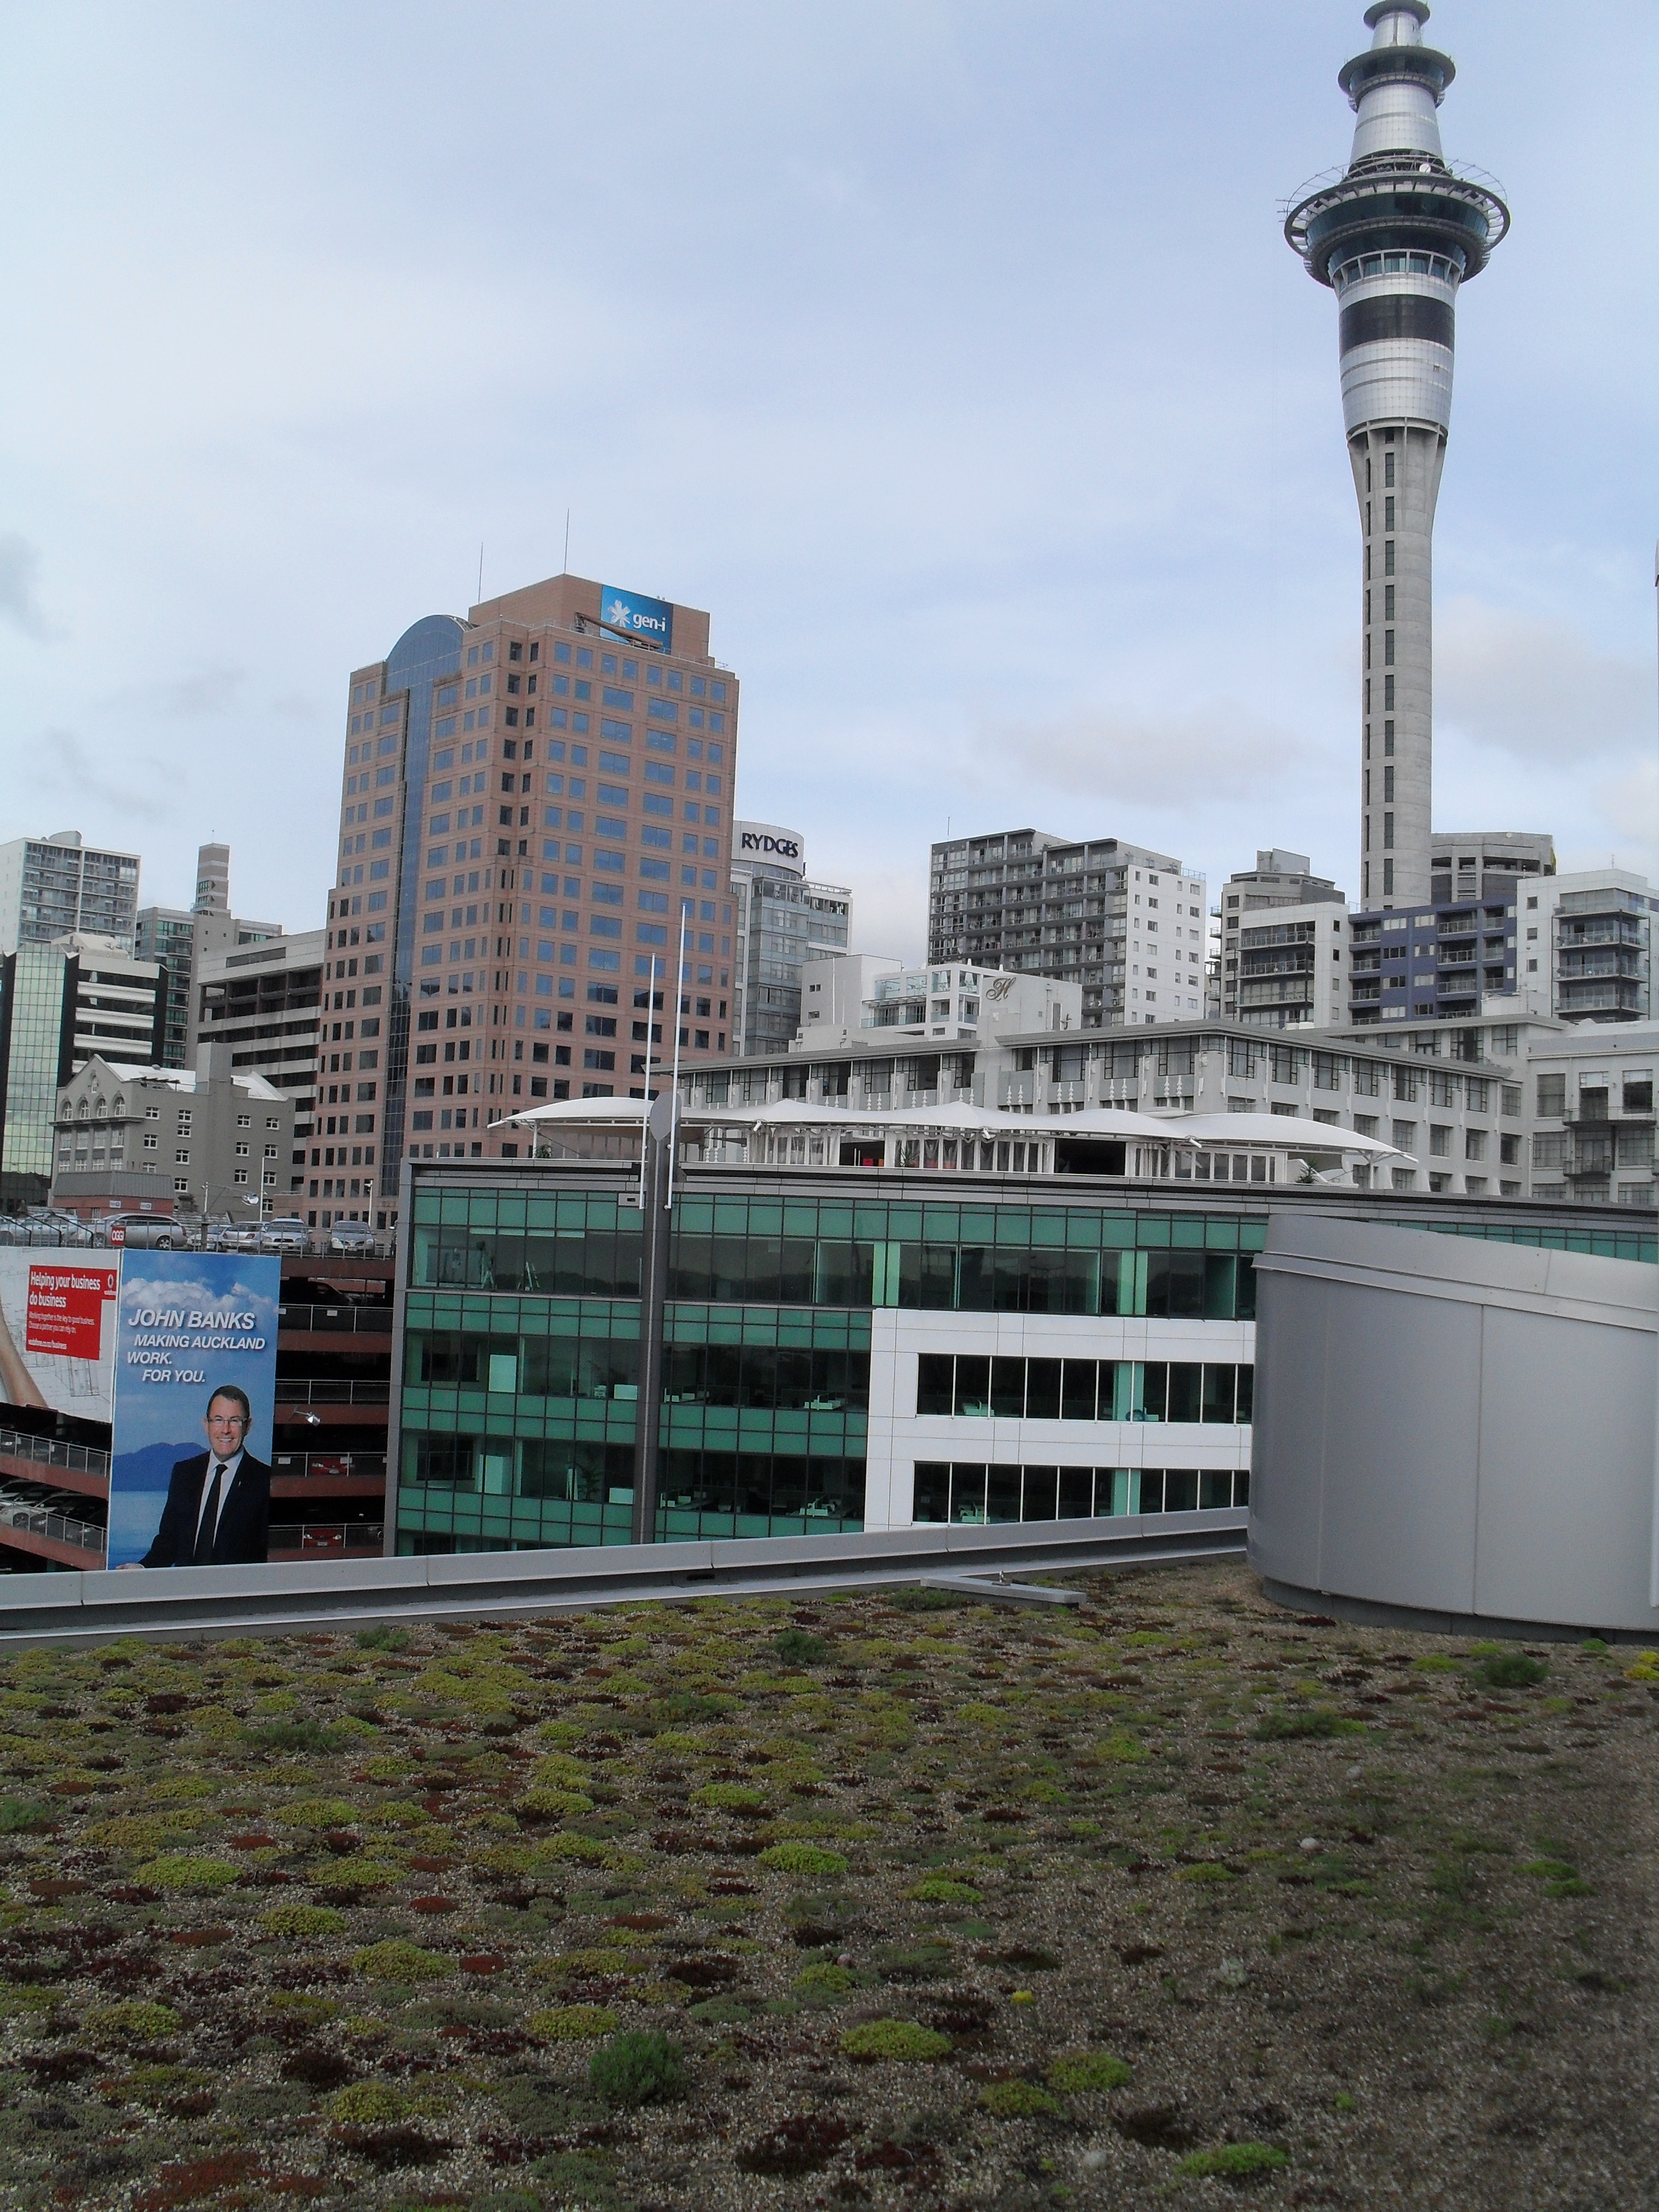 Green Roof in Auckland CBD